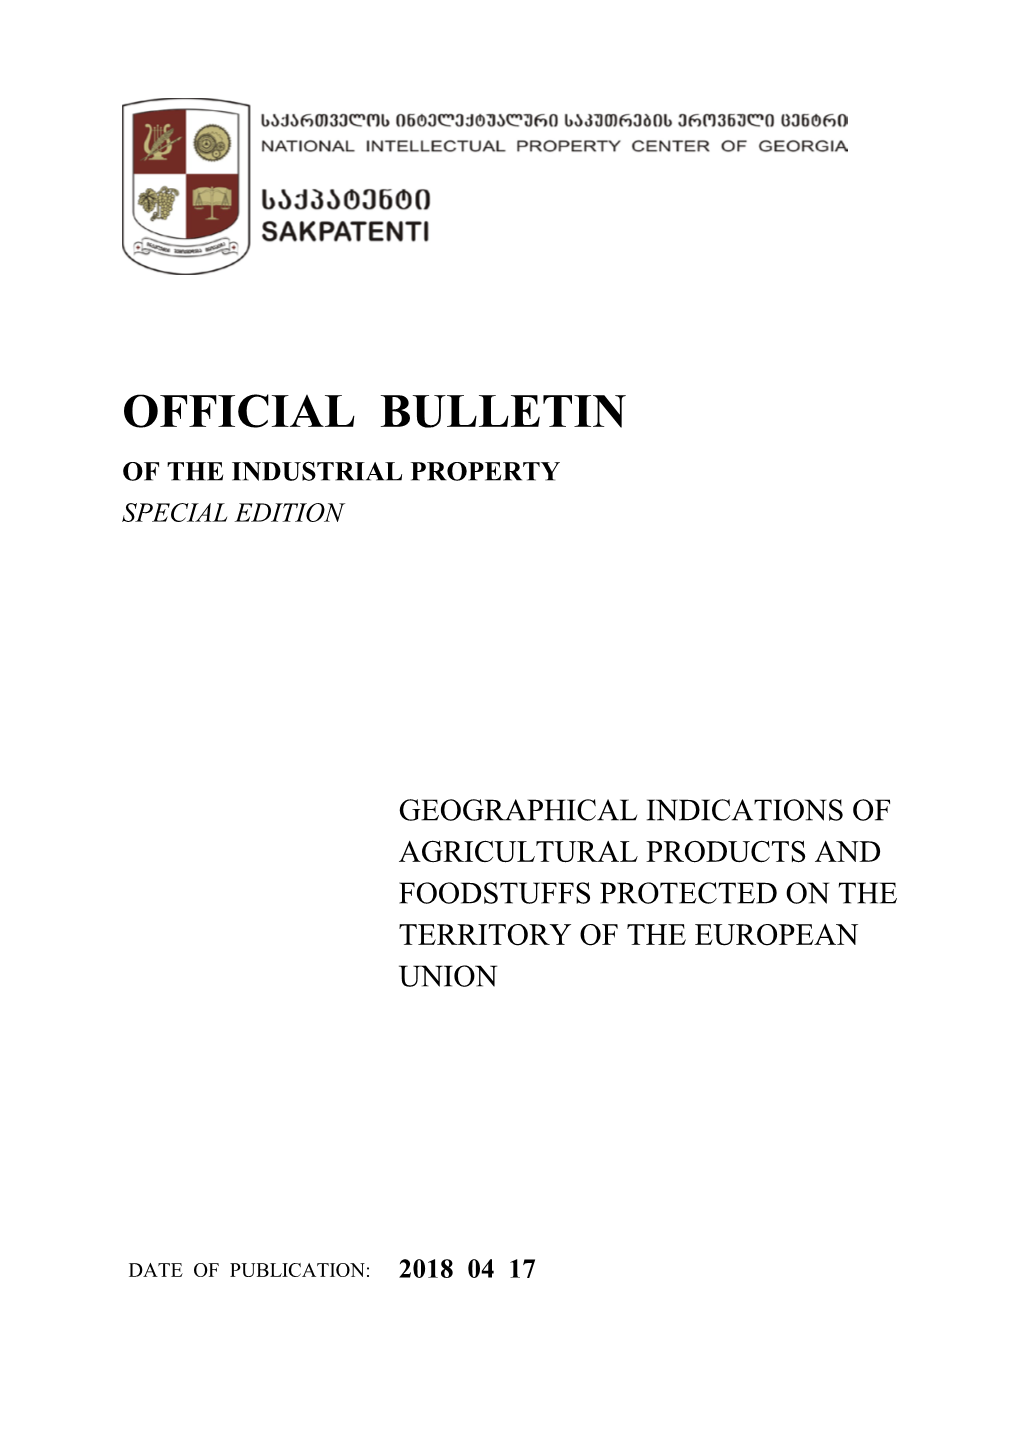 Official Bulletin of the Industrial Property Special Edition